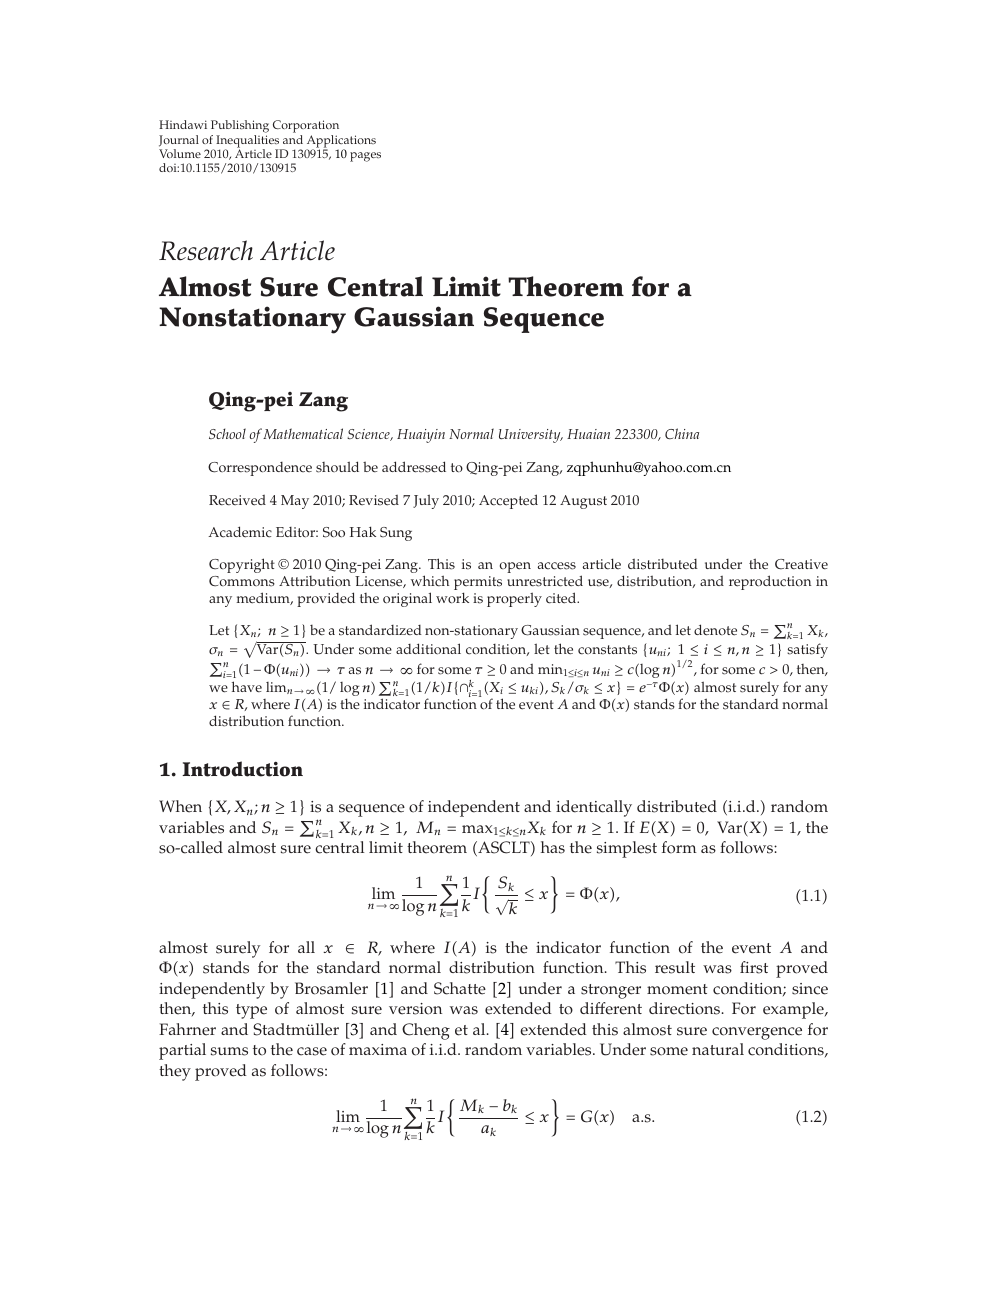 Almost Sure Central Limit Theorem For A Nonstationary Gaussian Sequence Topic Of Research Paper In Mathematics Download Scholarly Article Pdf And Read For Free On Cyberleninka Open Science Hub